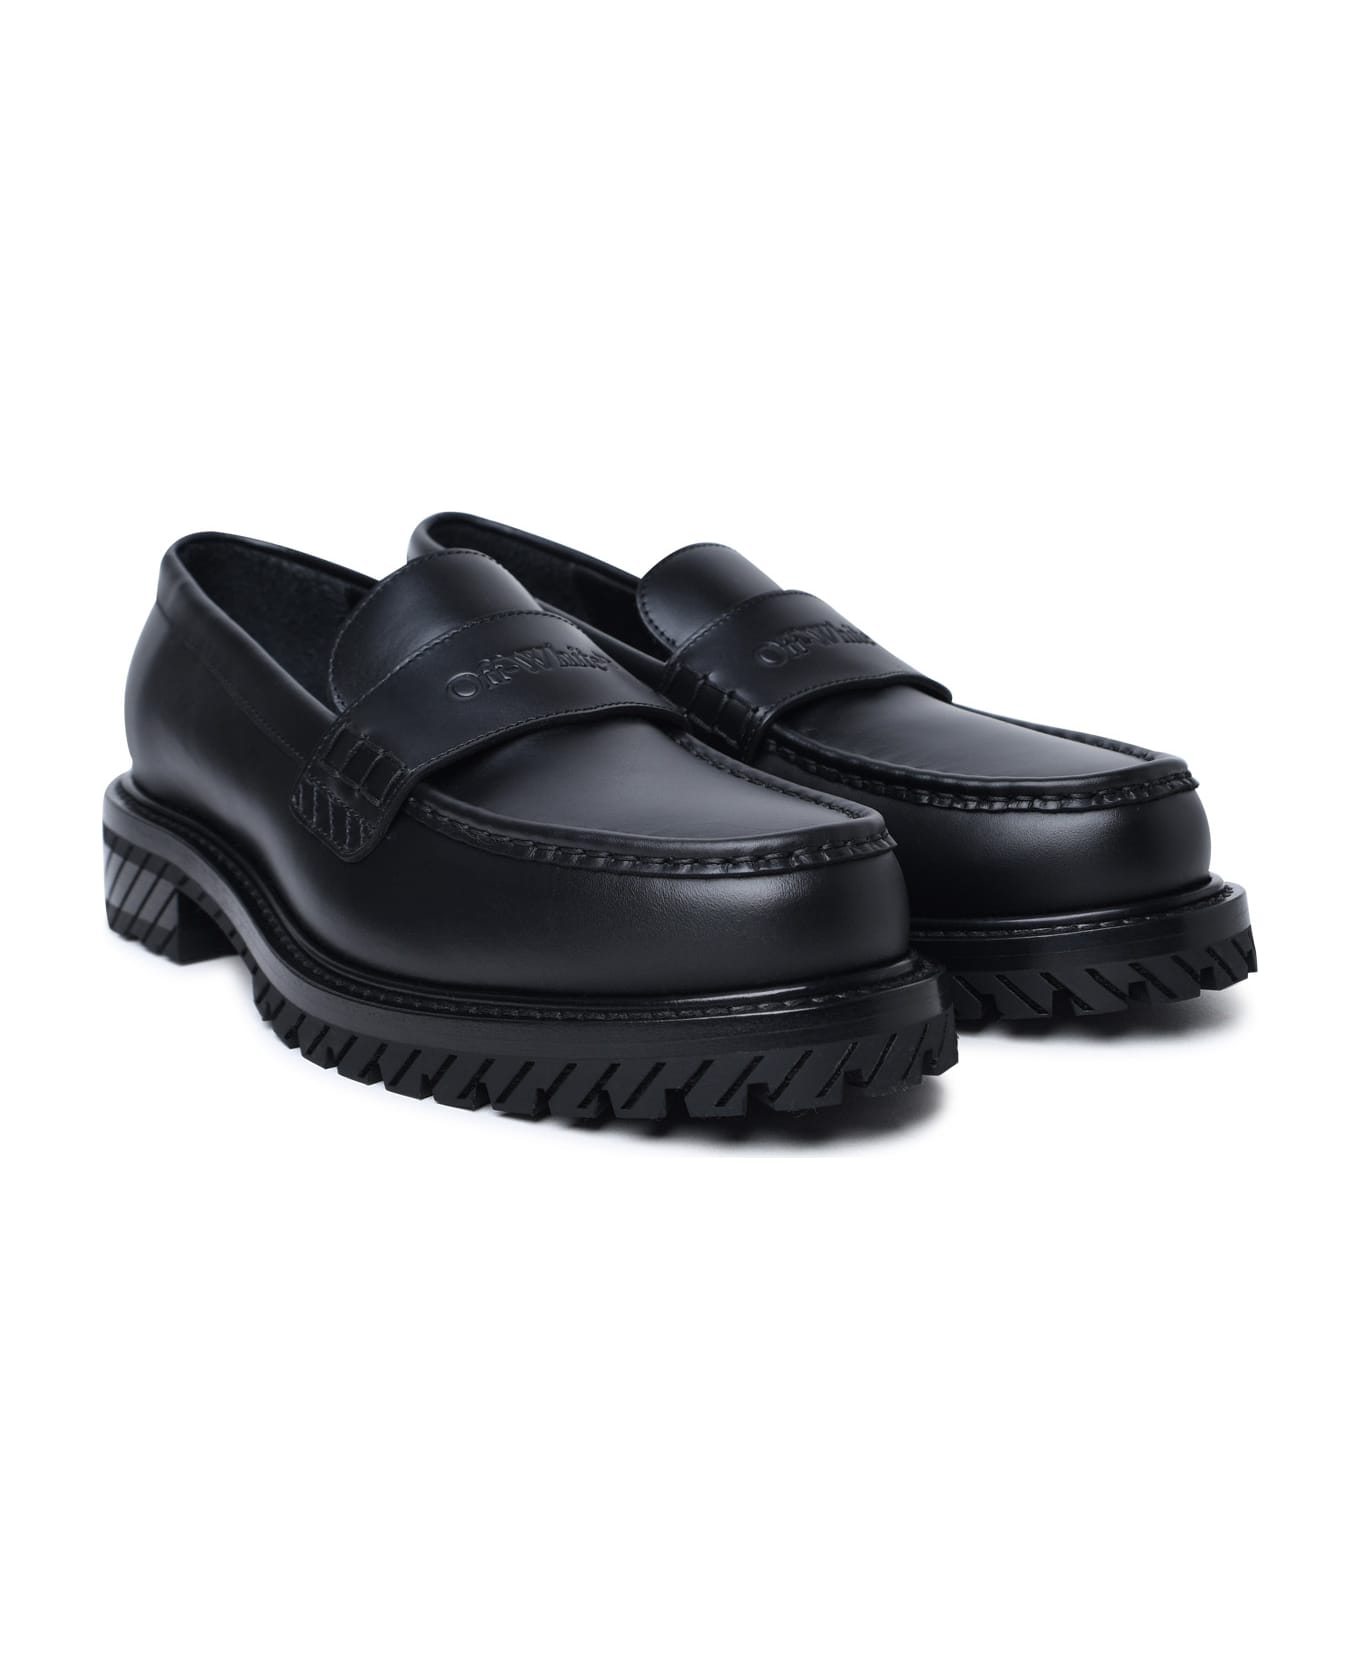 Off-White 'military' Black Leather Loafers - BLACK BLACK (Black) ローファー＆デッキシューズ